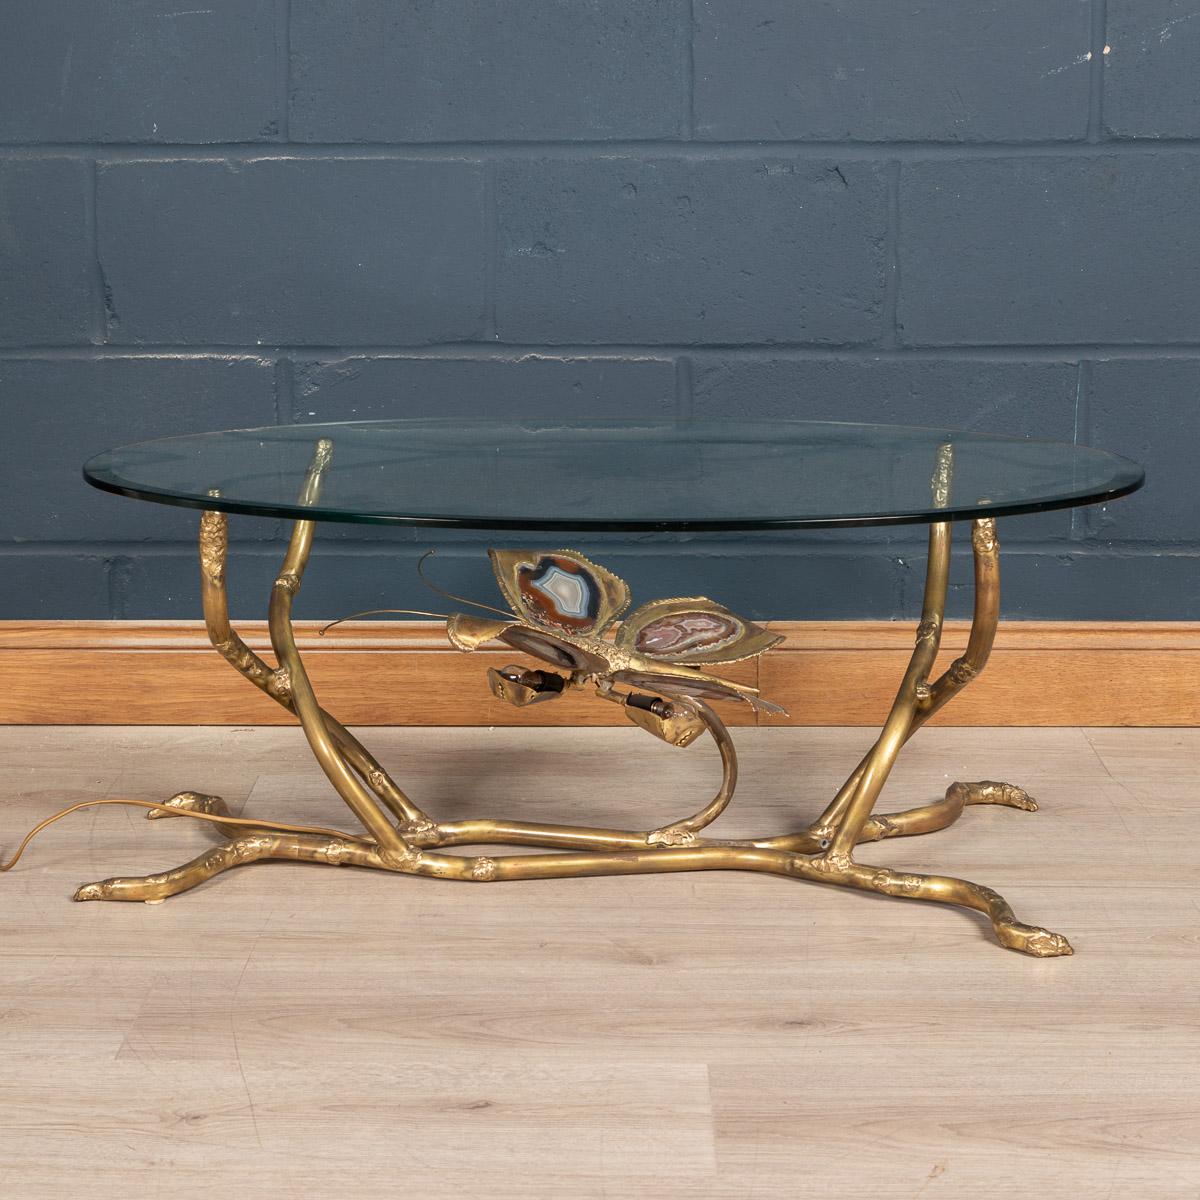 A stunning and striking sculptural coffee table or side table in the form of a butterfly with its wings outstretched. Hand made by the famous designer of the 1970s Henri Fernandez, this item is made largely from quality brass and agate slices, the